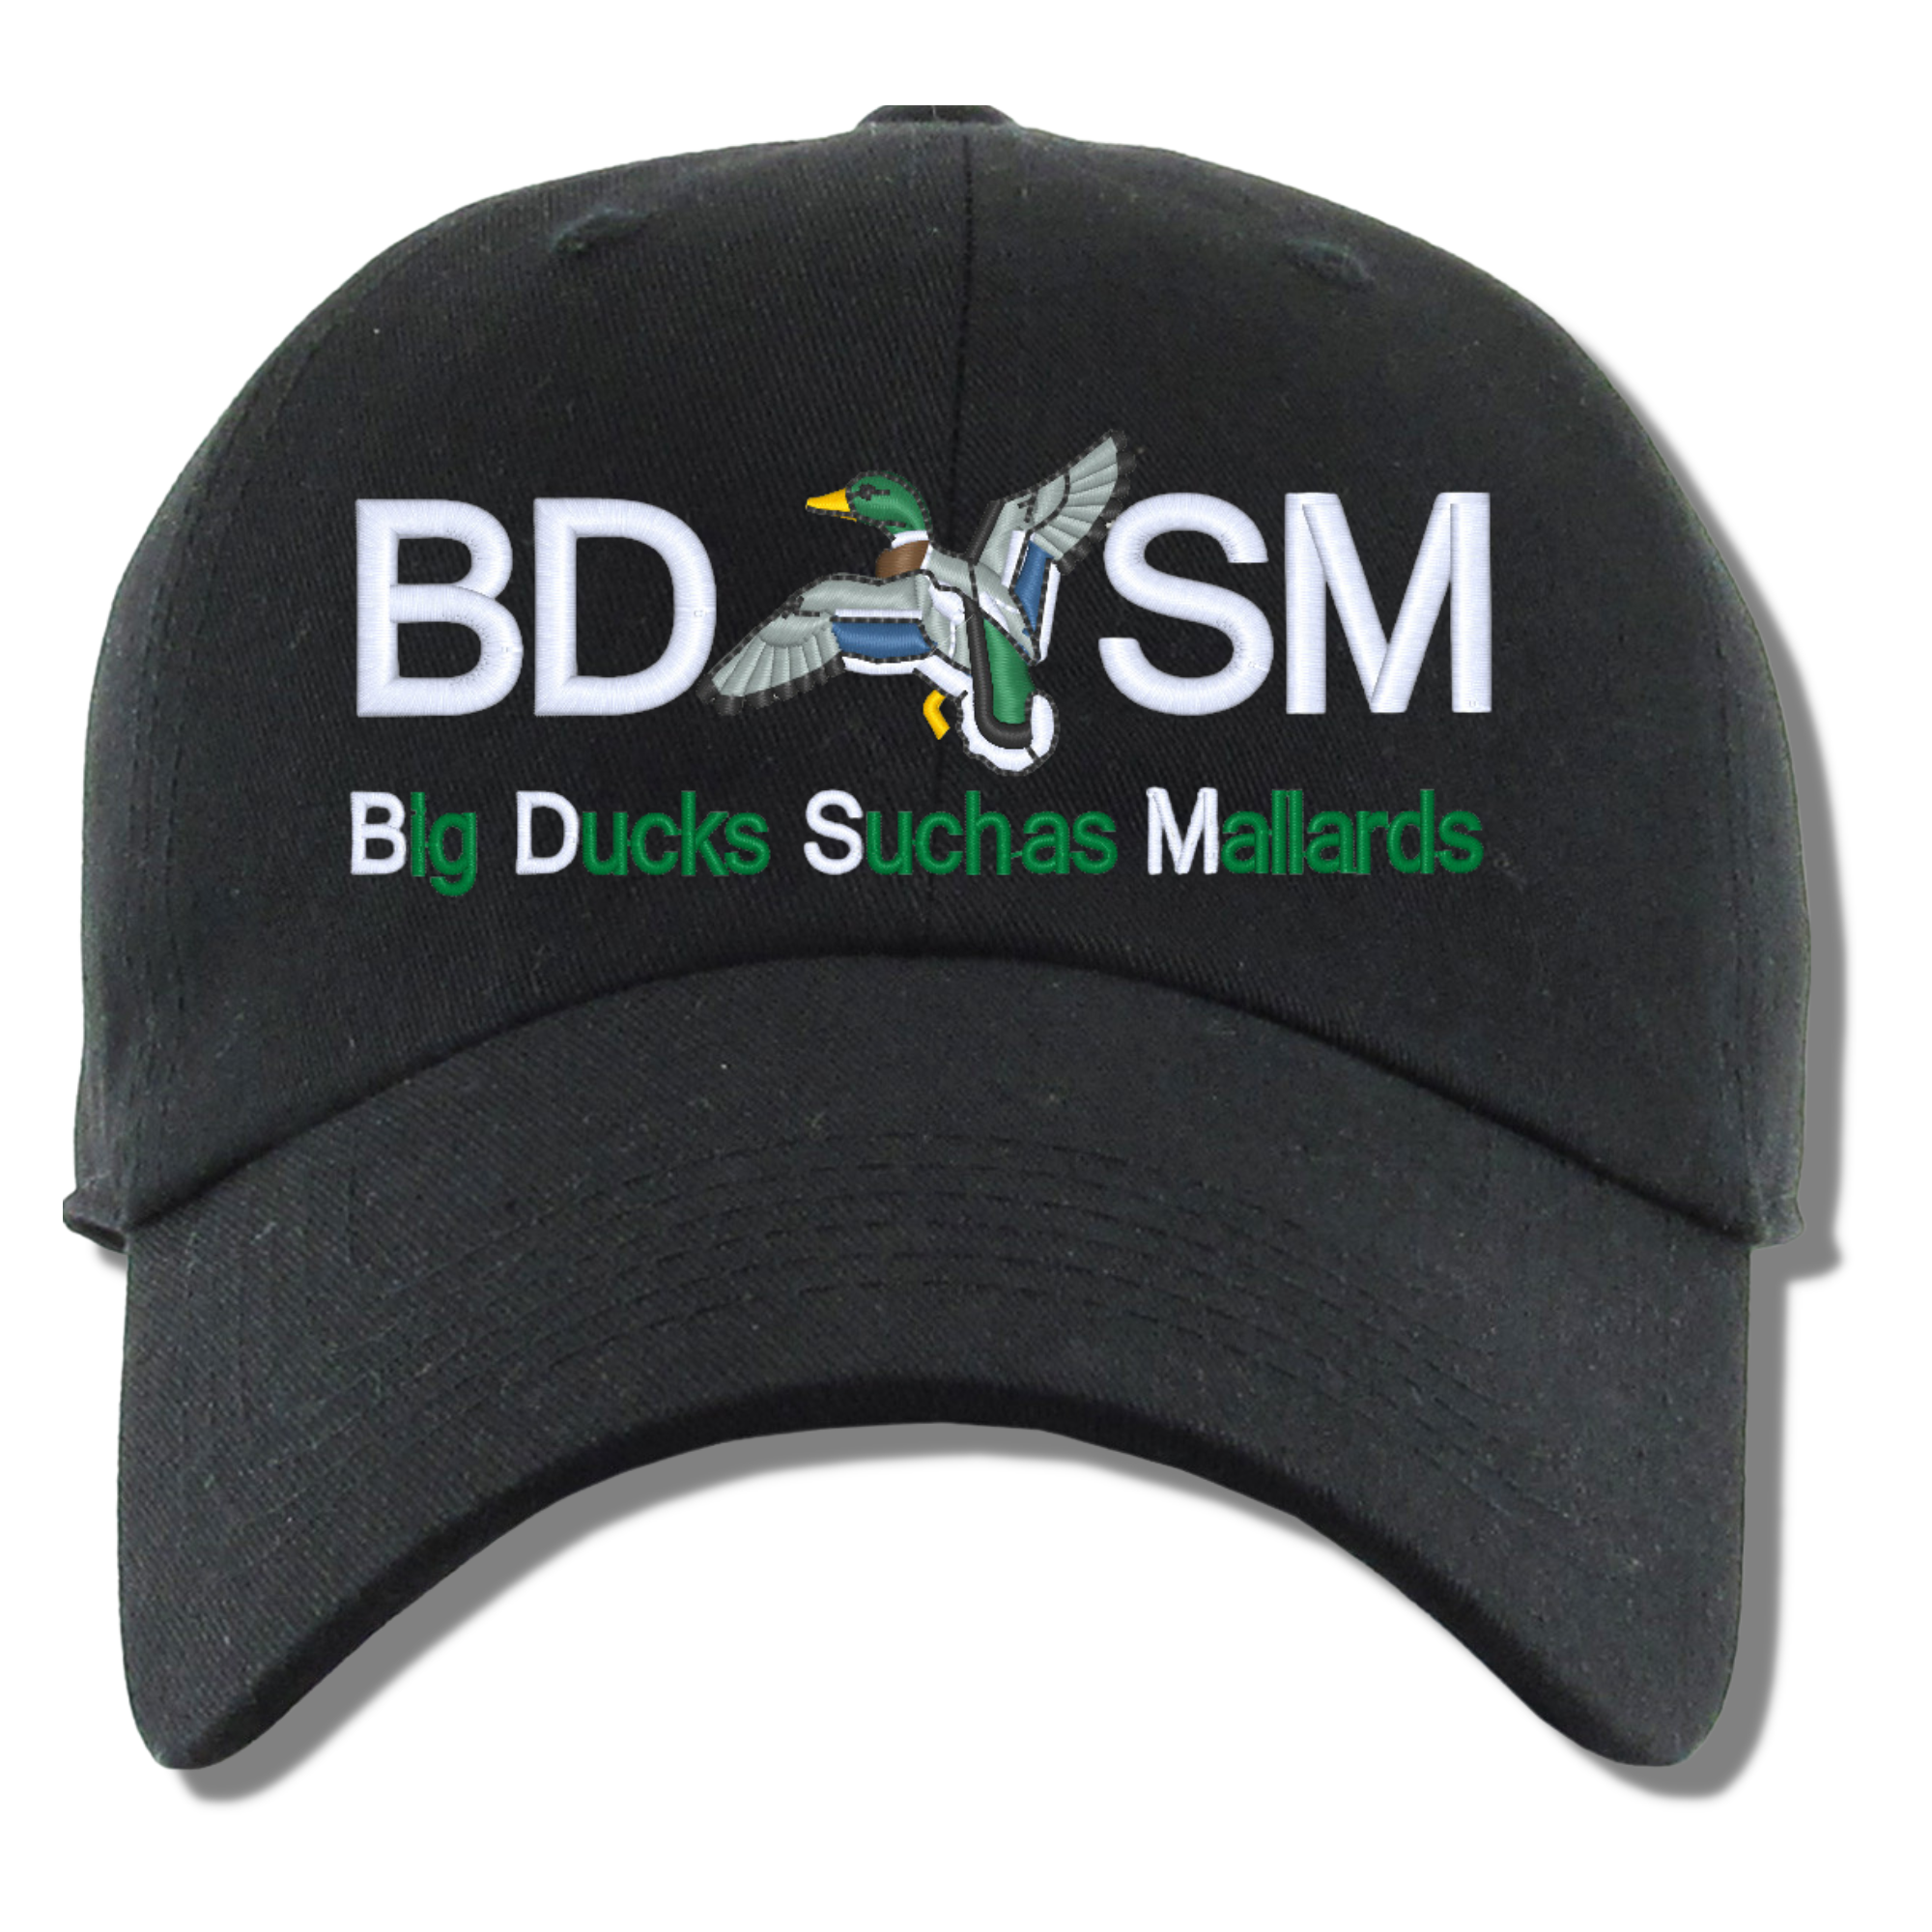 Big Ducks Such As Mallards BDSM Embroidered Dad Hat, One Size Fits All